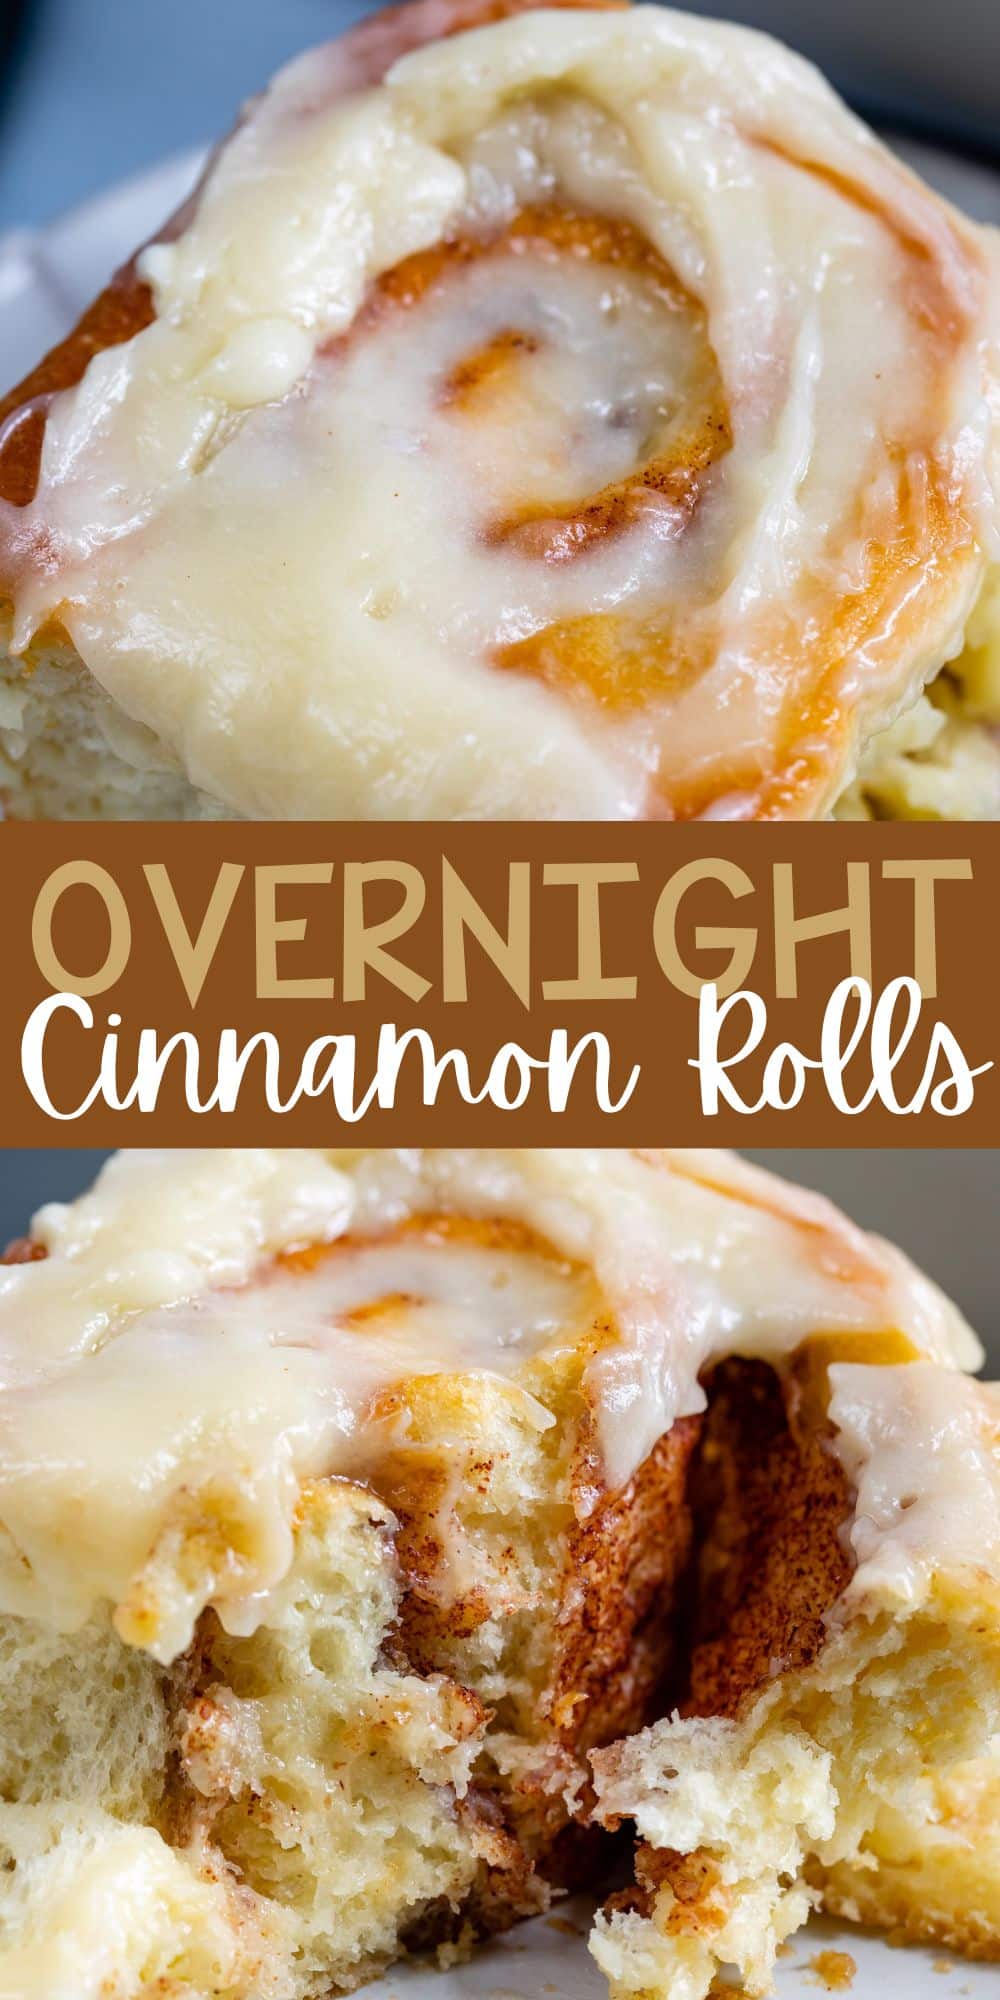 two photos of cinnamon rolls with icing on top with words on the image.